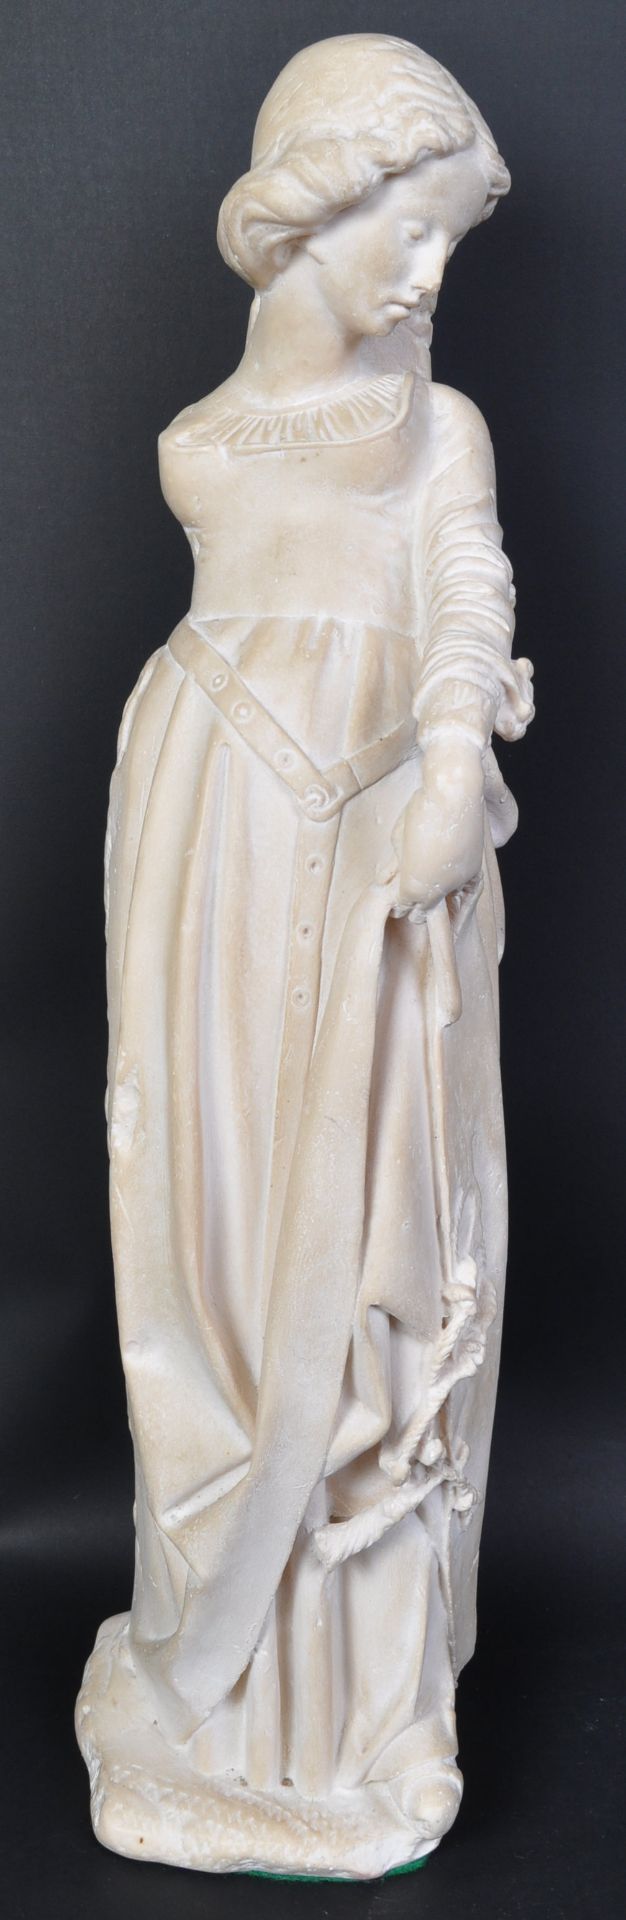 LARGE STATUE FAUX MARBLE FIGURINE WITH CARVED EXAMPLES - Image 2 of 7